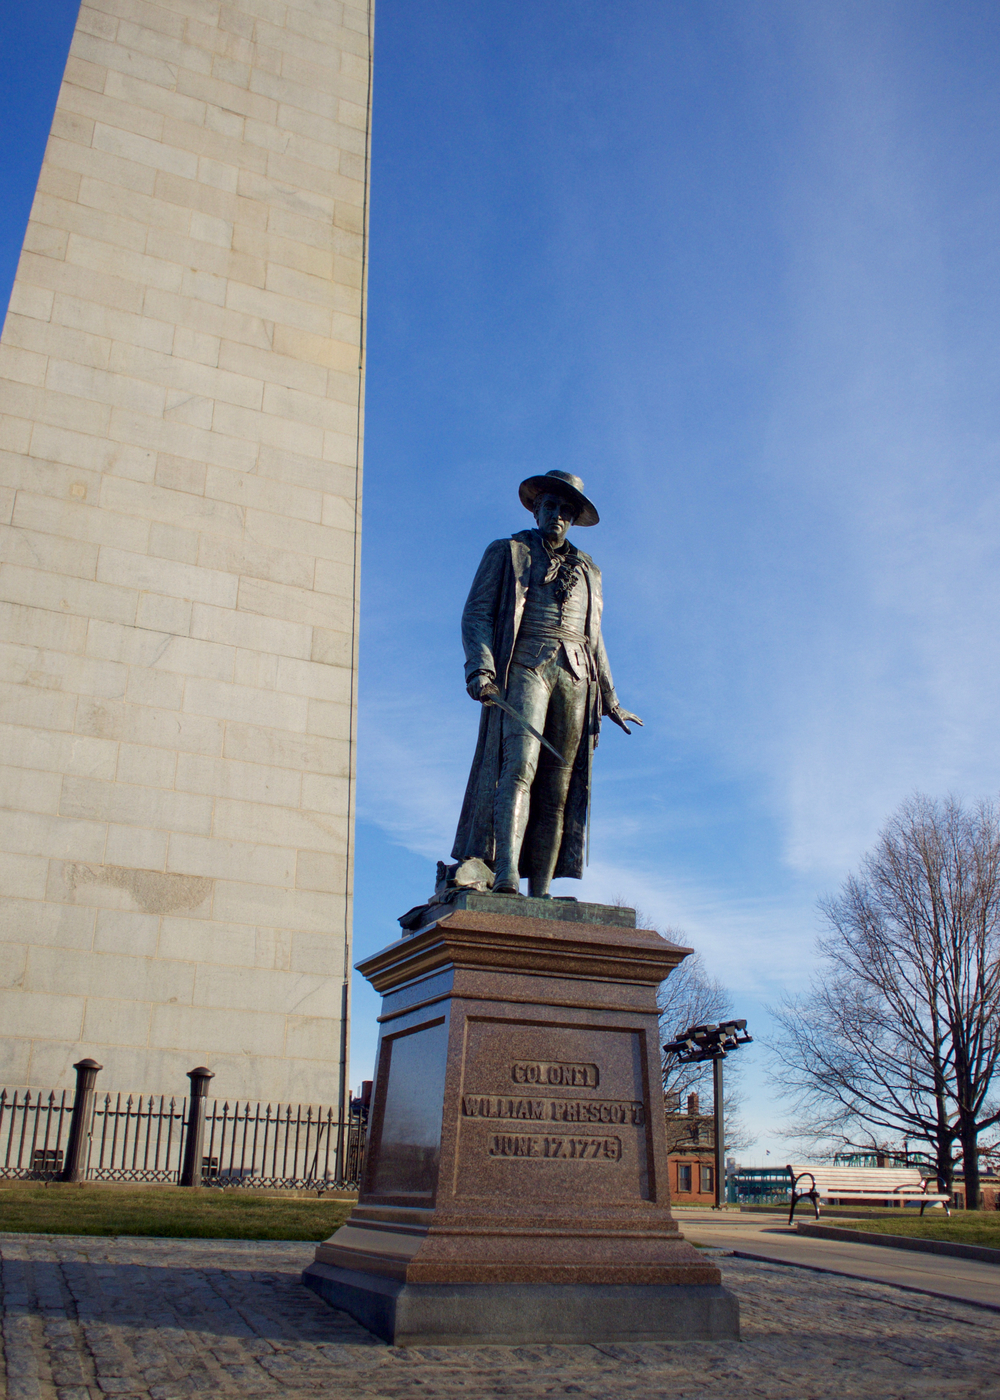 IRL Col. Prescott Statue from South Side Main Entrance